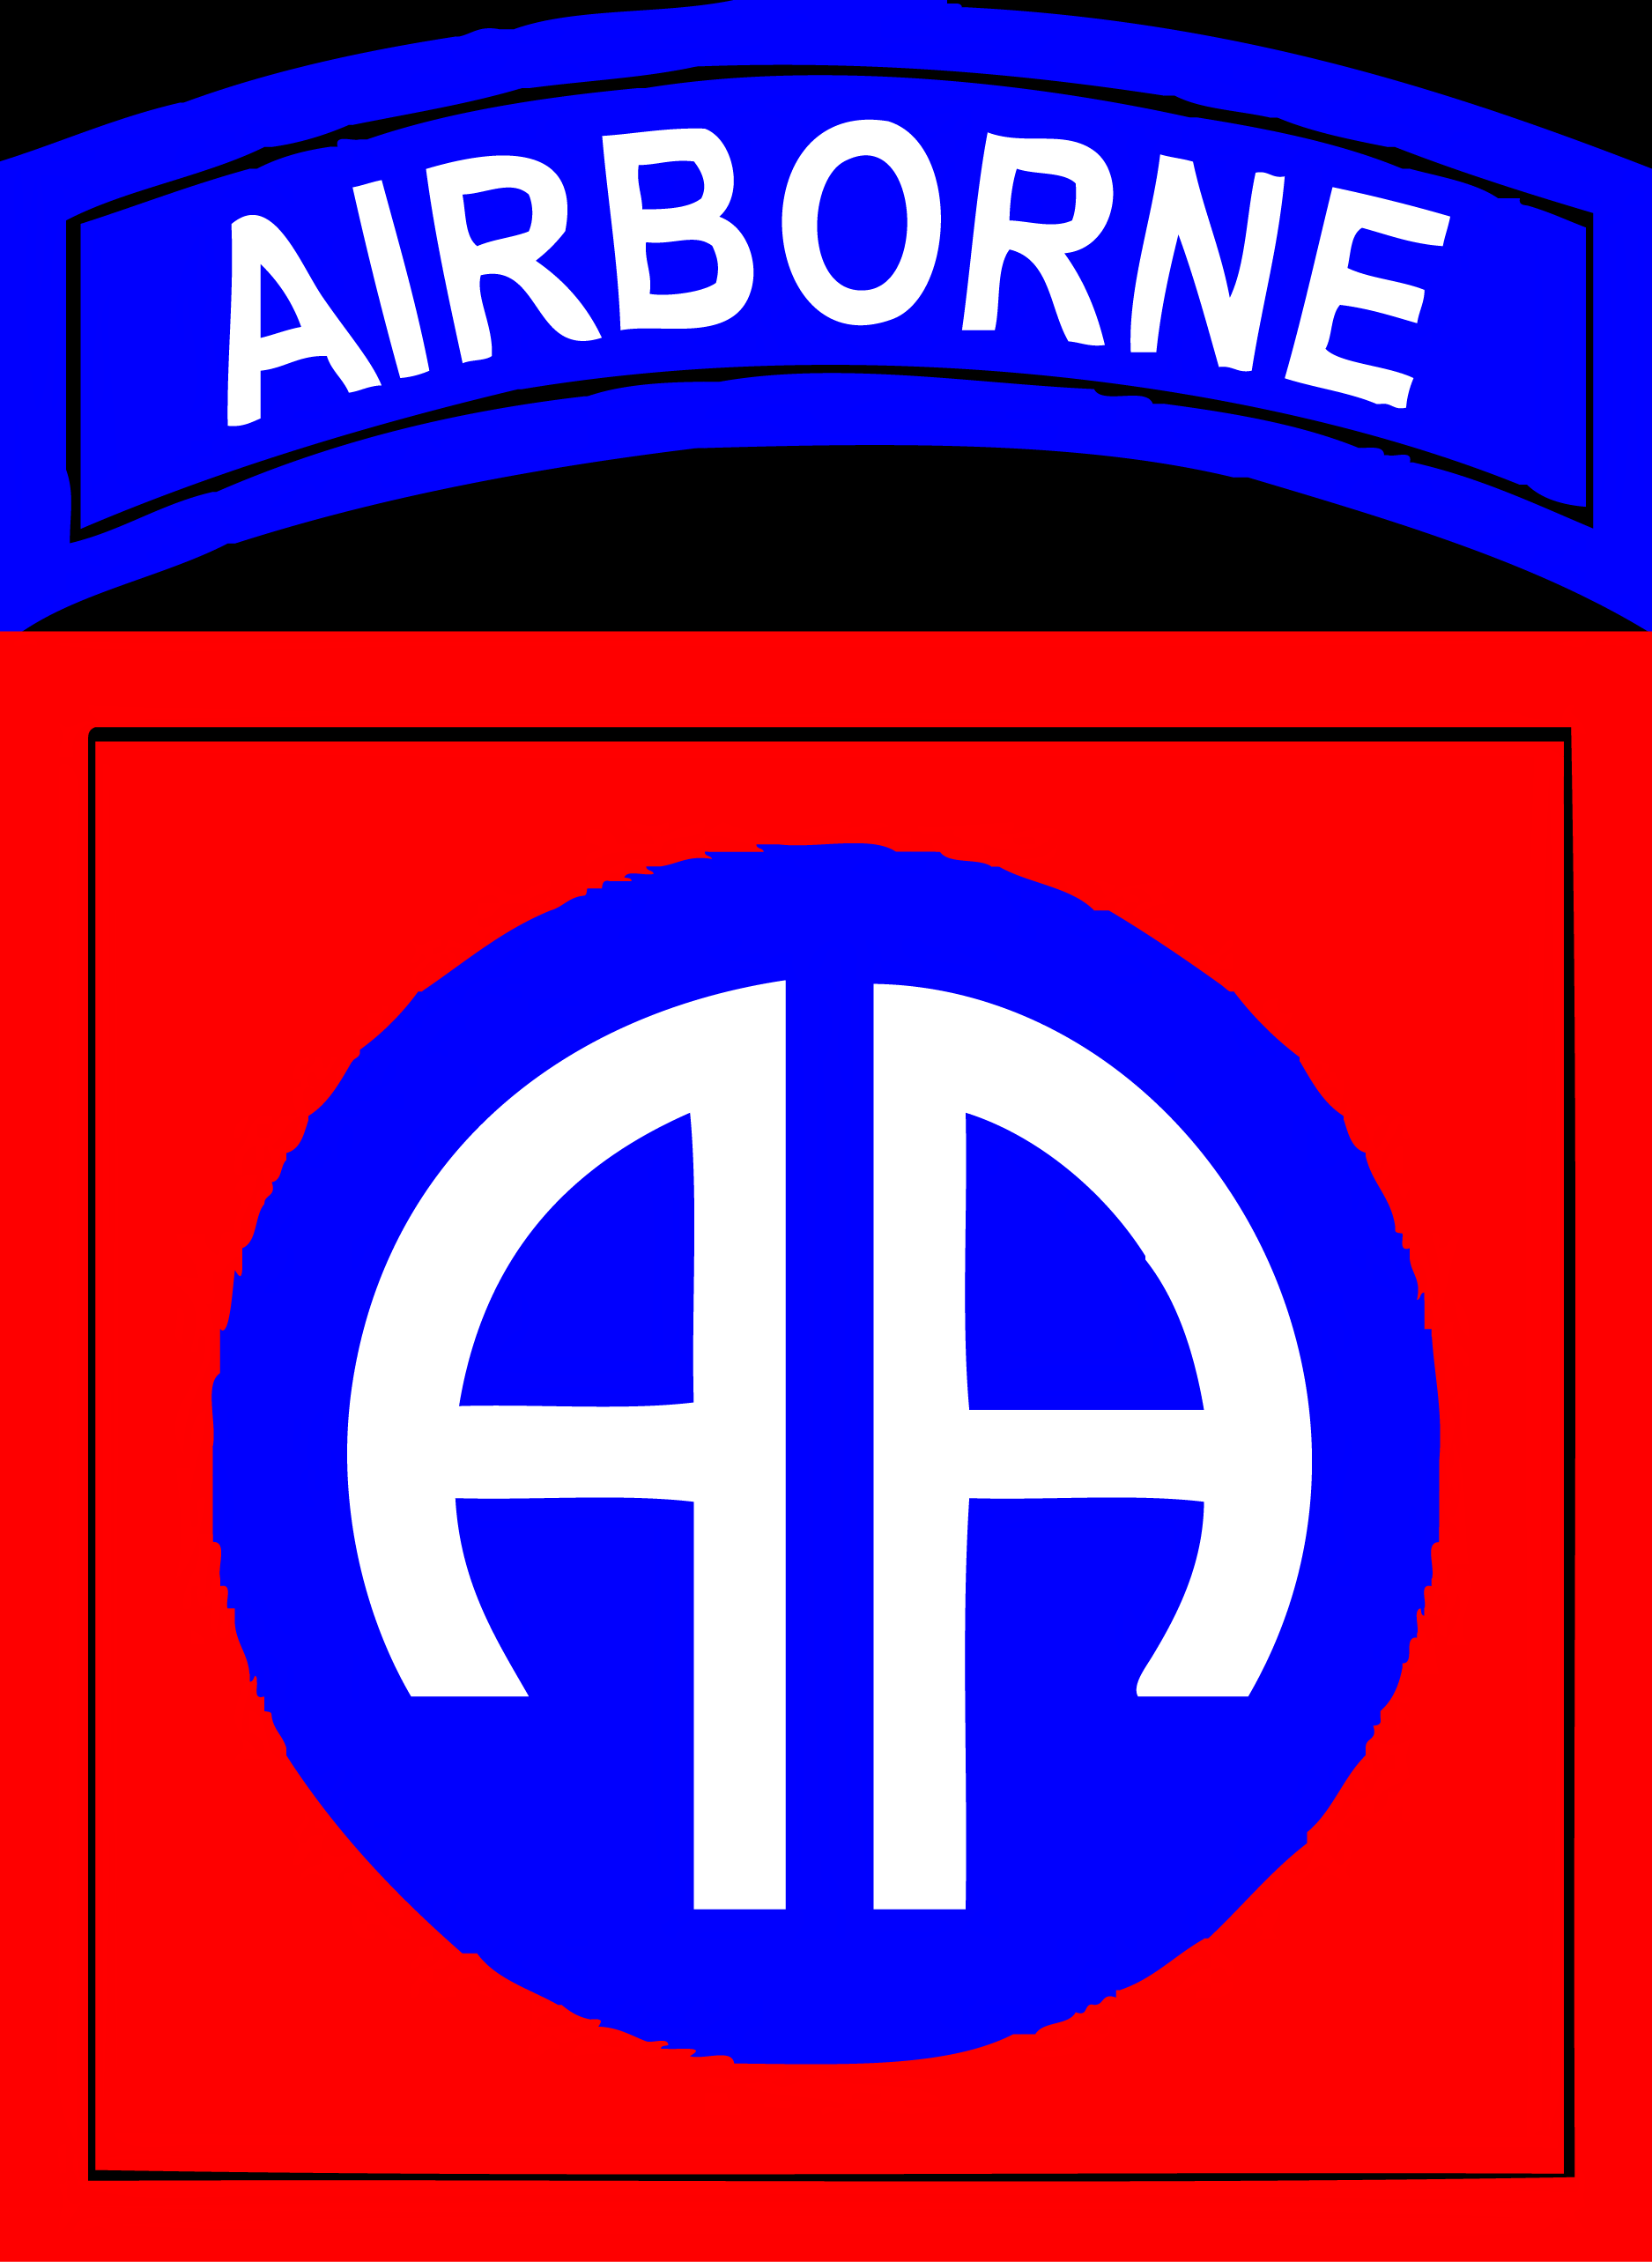 82nd Airborne Wallpaper Image & Picture Airborne Shoulder Patch